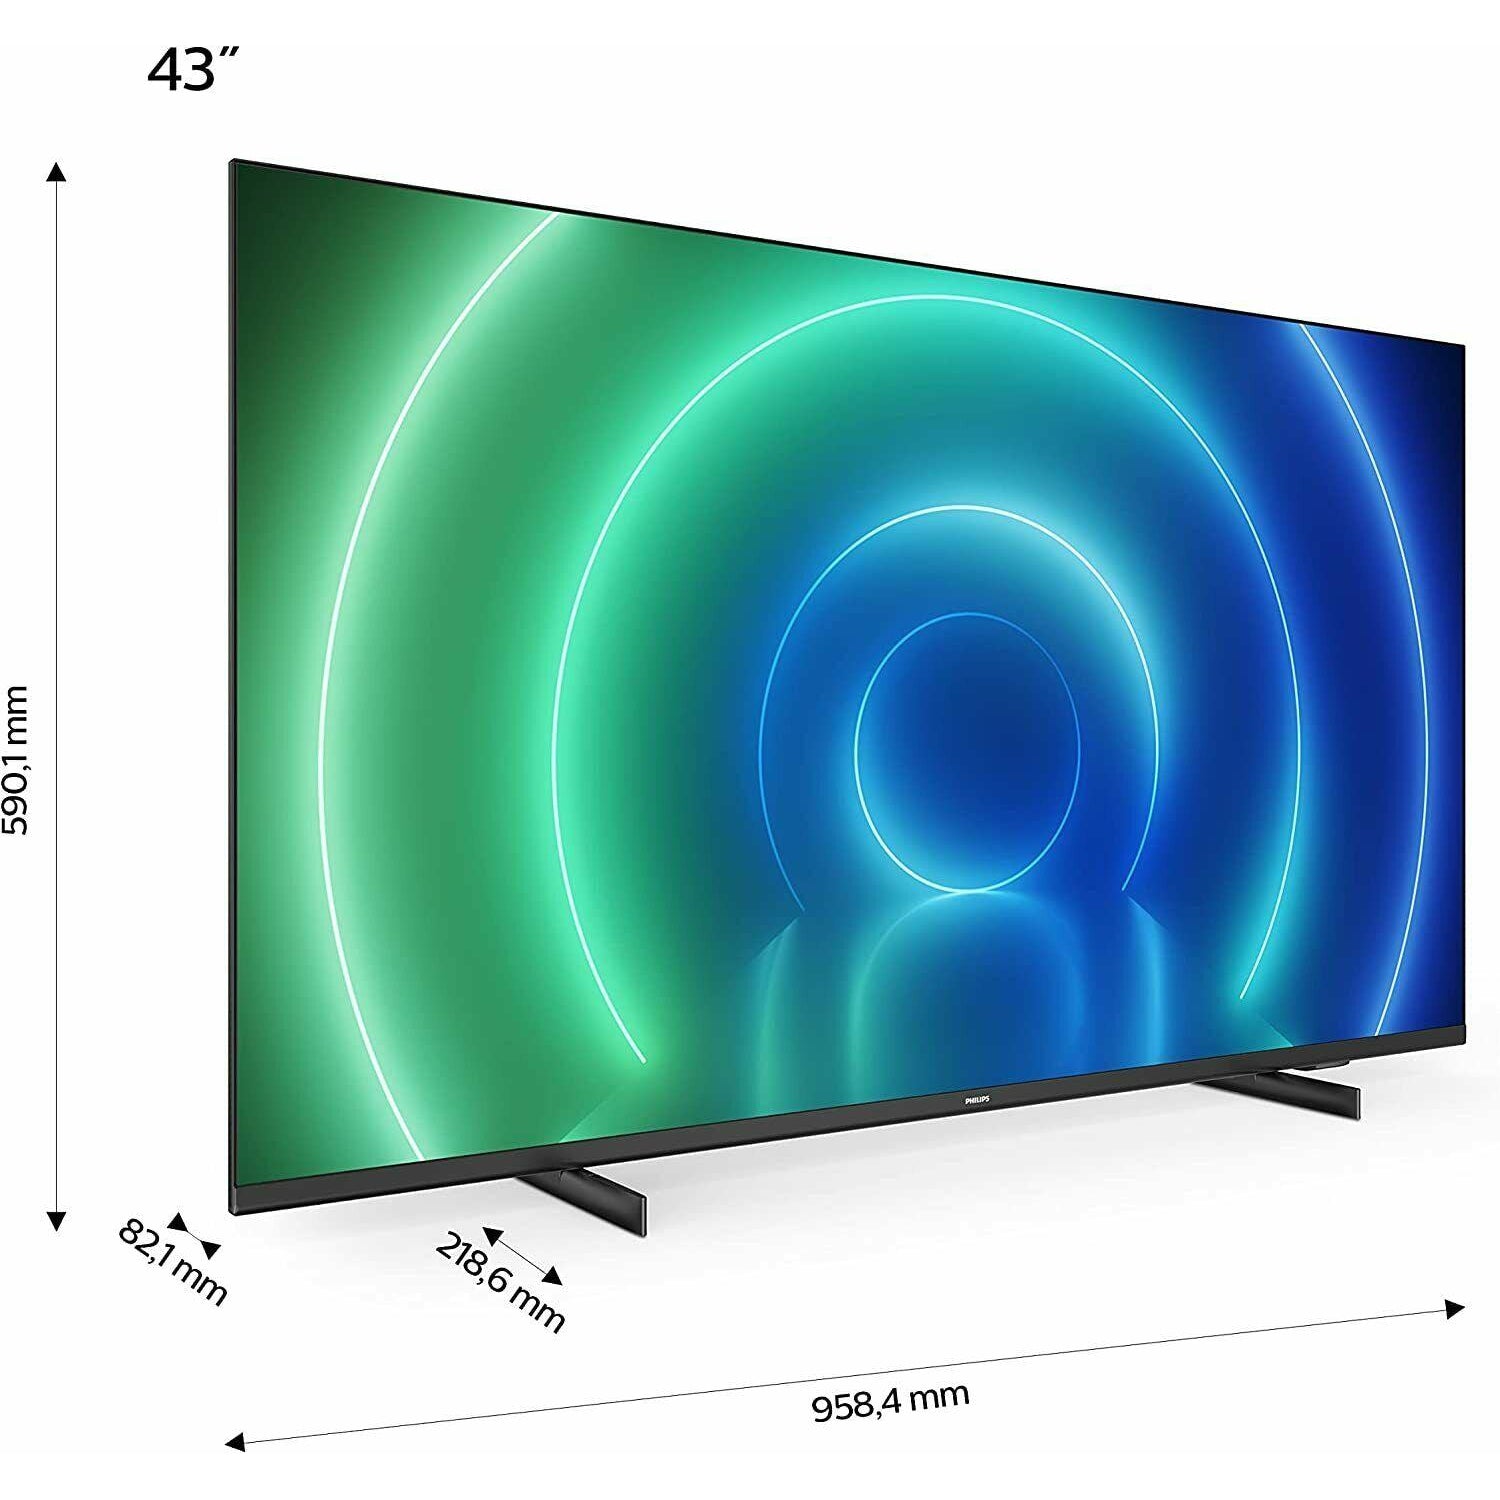 Buy Philips Ambilight 32In PFS6908 Smart Full HD HDR Freeview TV, Televisions